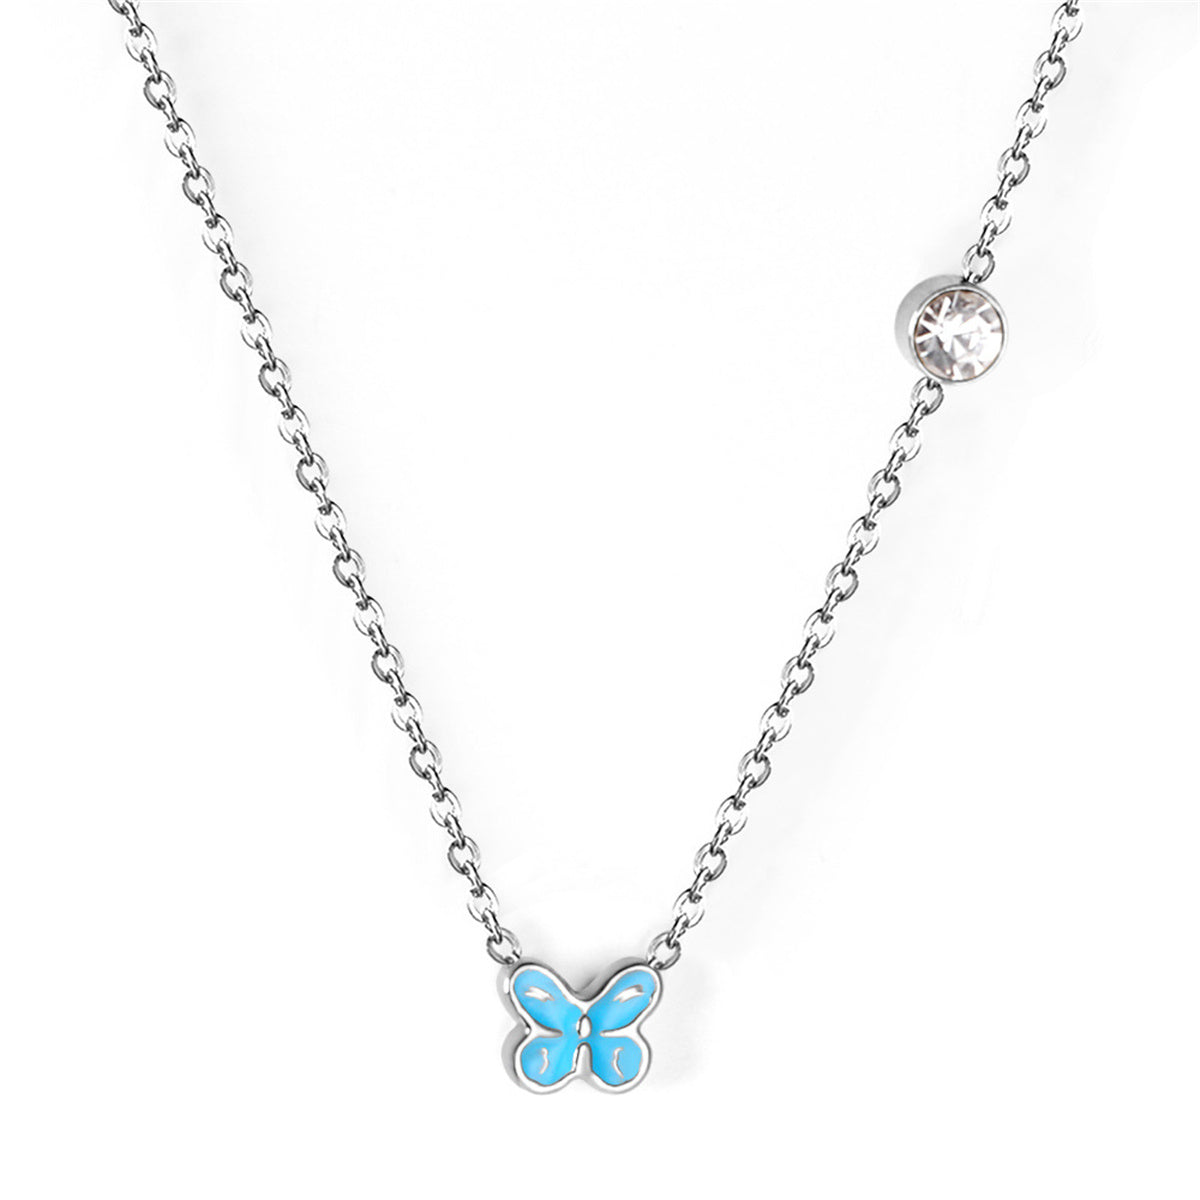 Lake Blue Enamel & Silver-Plated Cubic Zirconia-Accent Butterfly Pendant Necklace